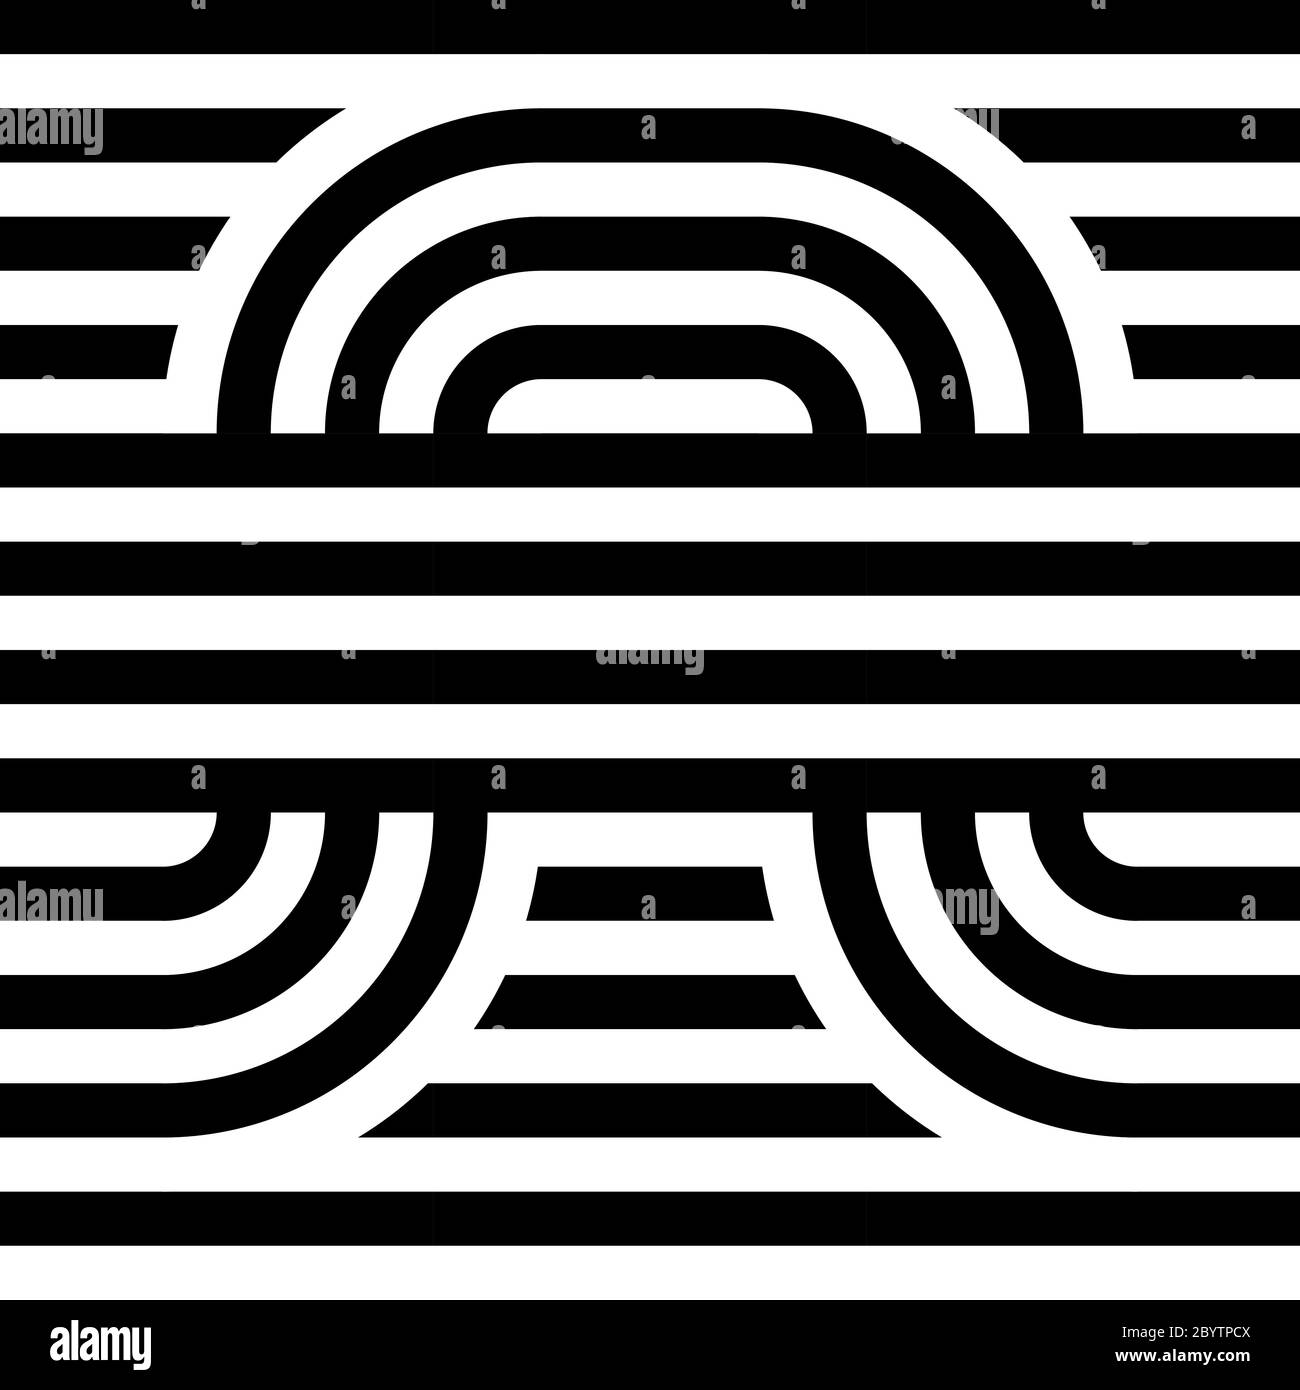 Striped abstract seamless pattern background tile. Black and white retro stripy vector illustration. Textile fabric design element. Stock Vector